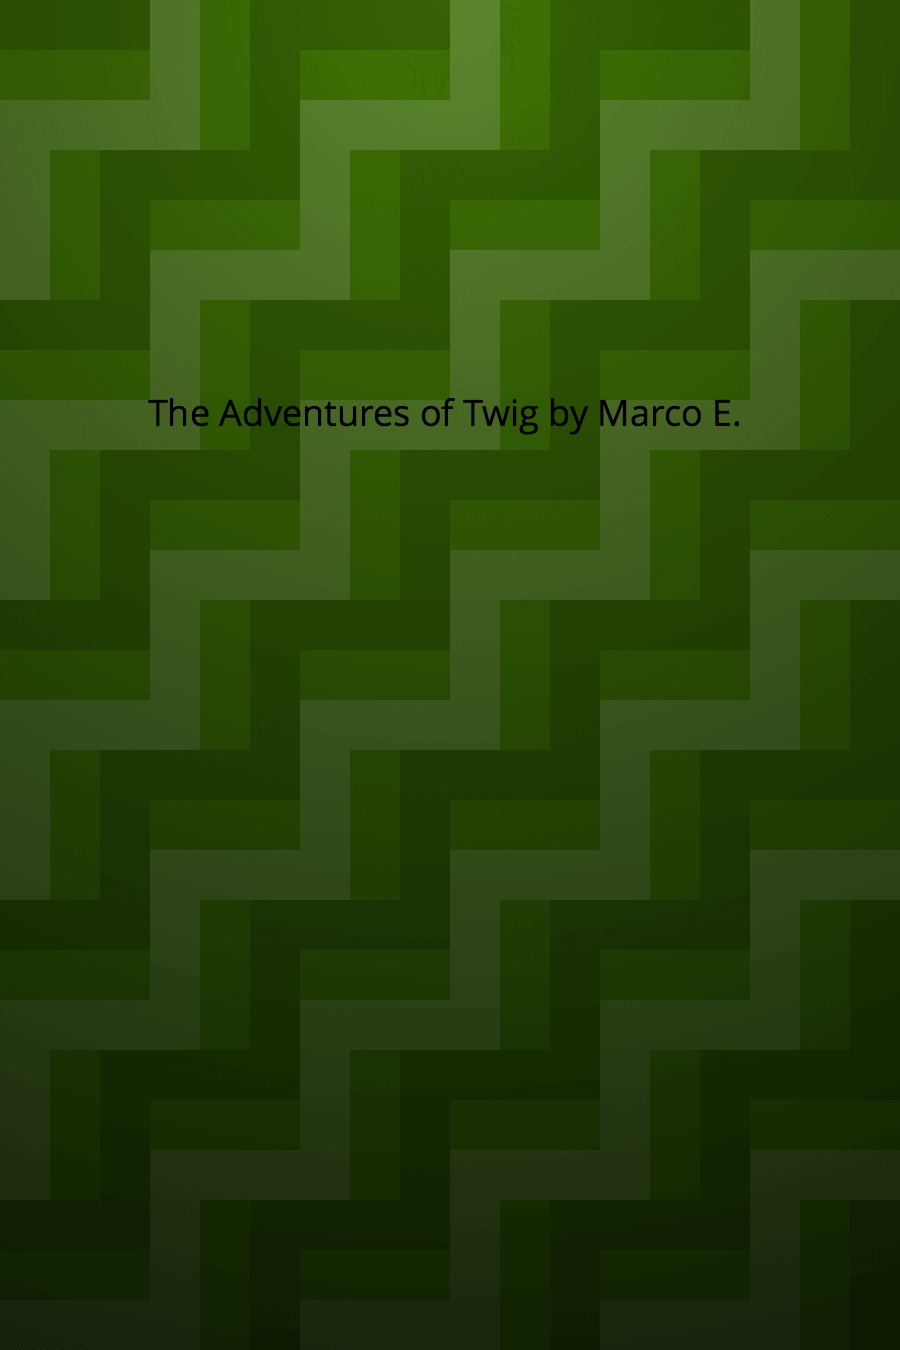 The Adventures of Twig by Marco E